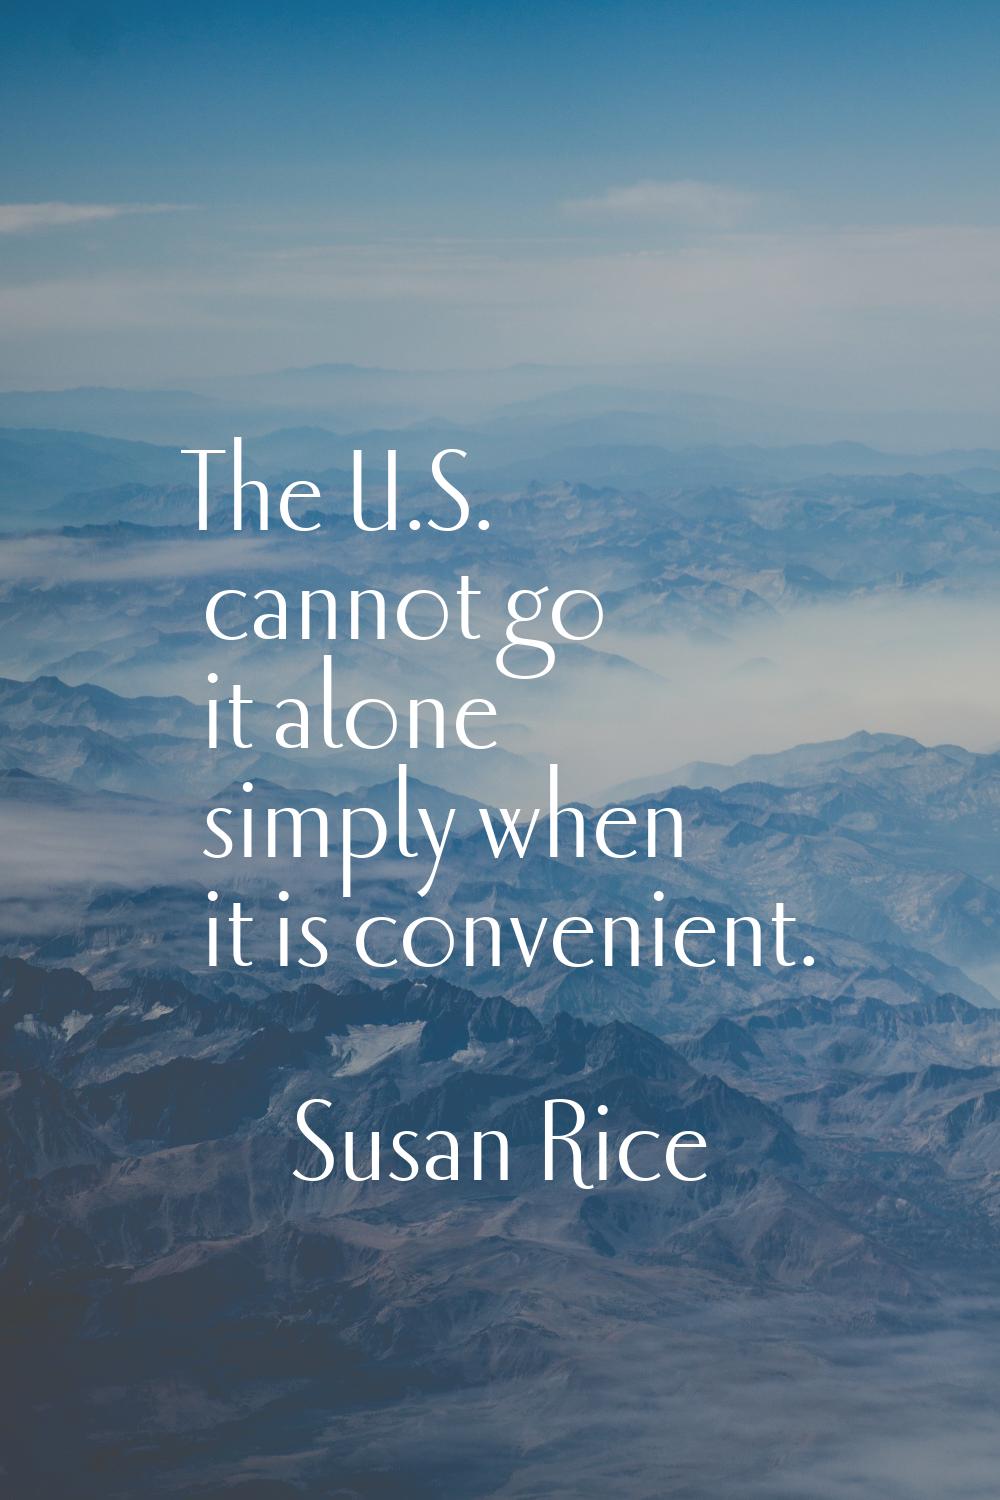 The U.S. cannot go it alone simply when it is convenient.